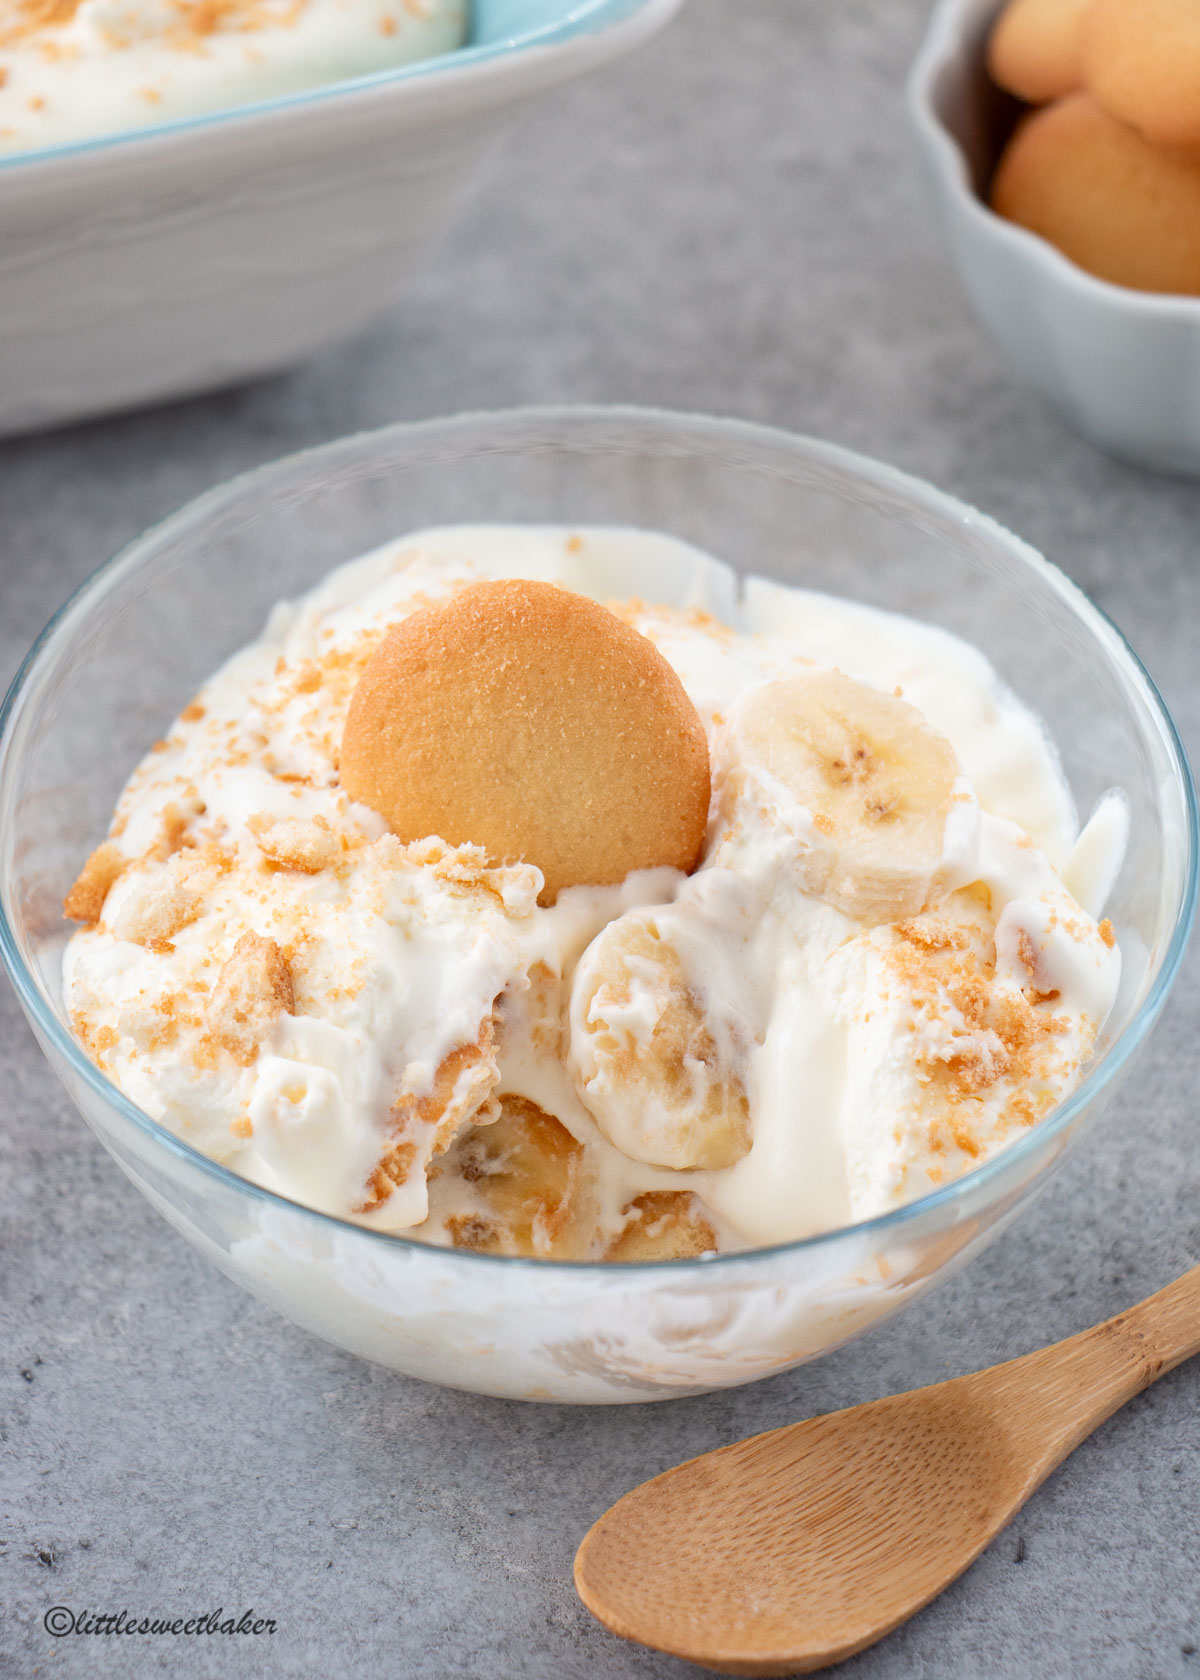 A bowl of banana pudding with a wooden spoon